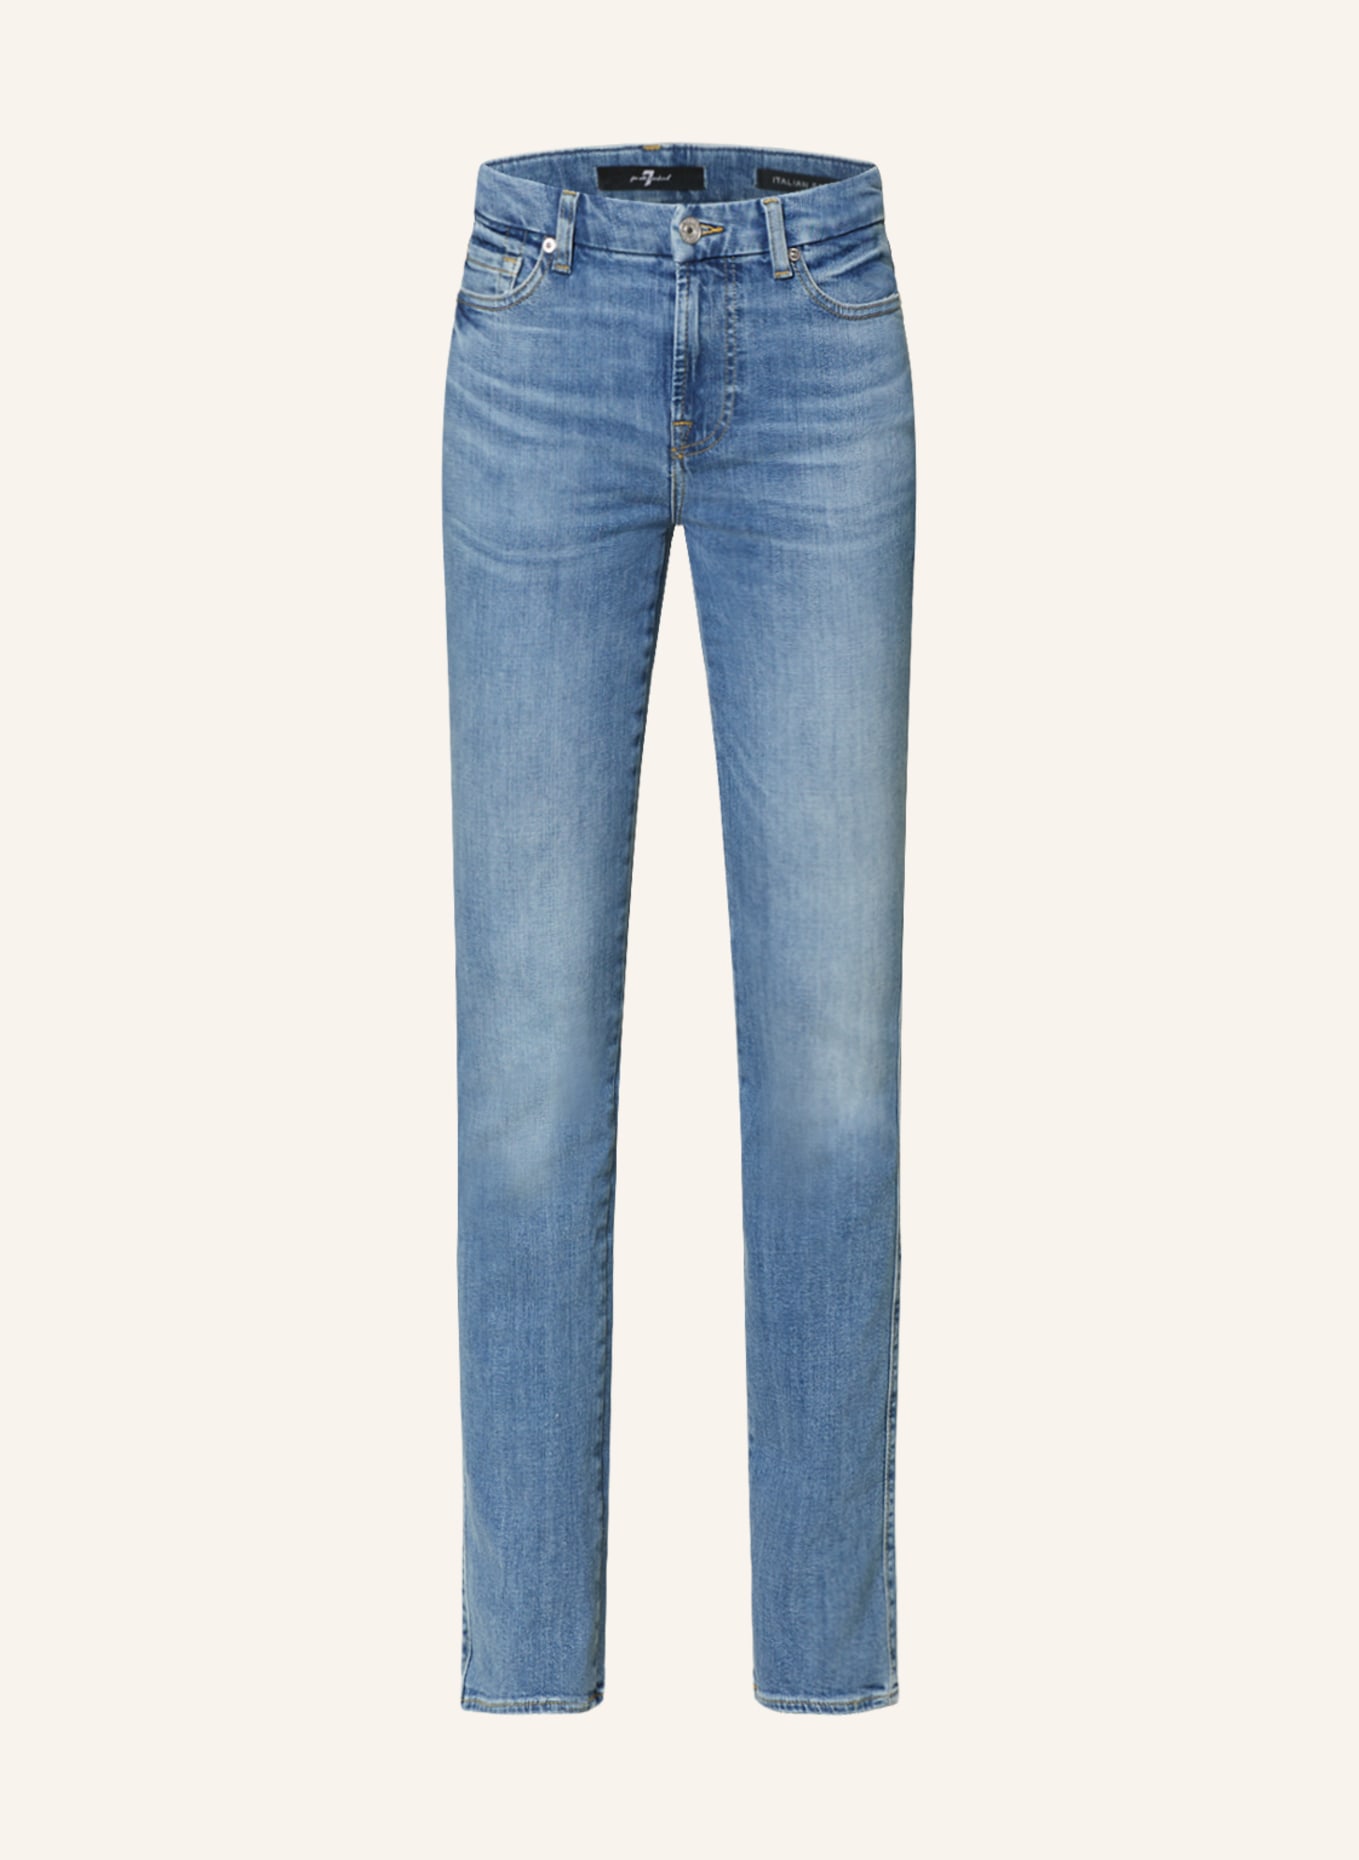 7 for all mankind Straight Jeans KIMMIE, Farbe: IH LIGHT BLUE (Bild 1)